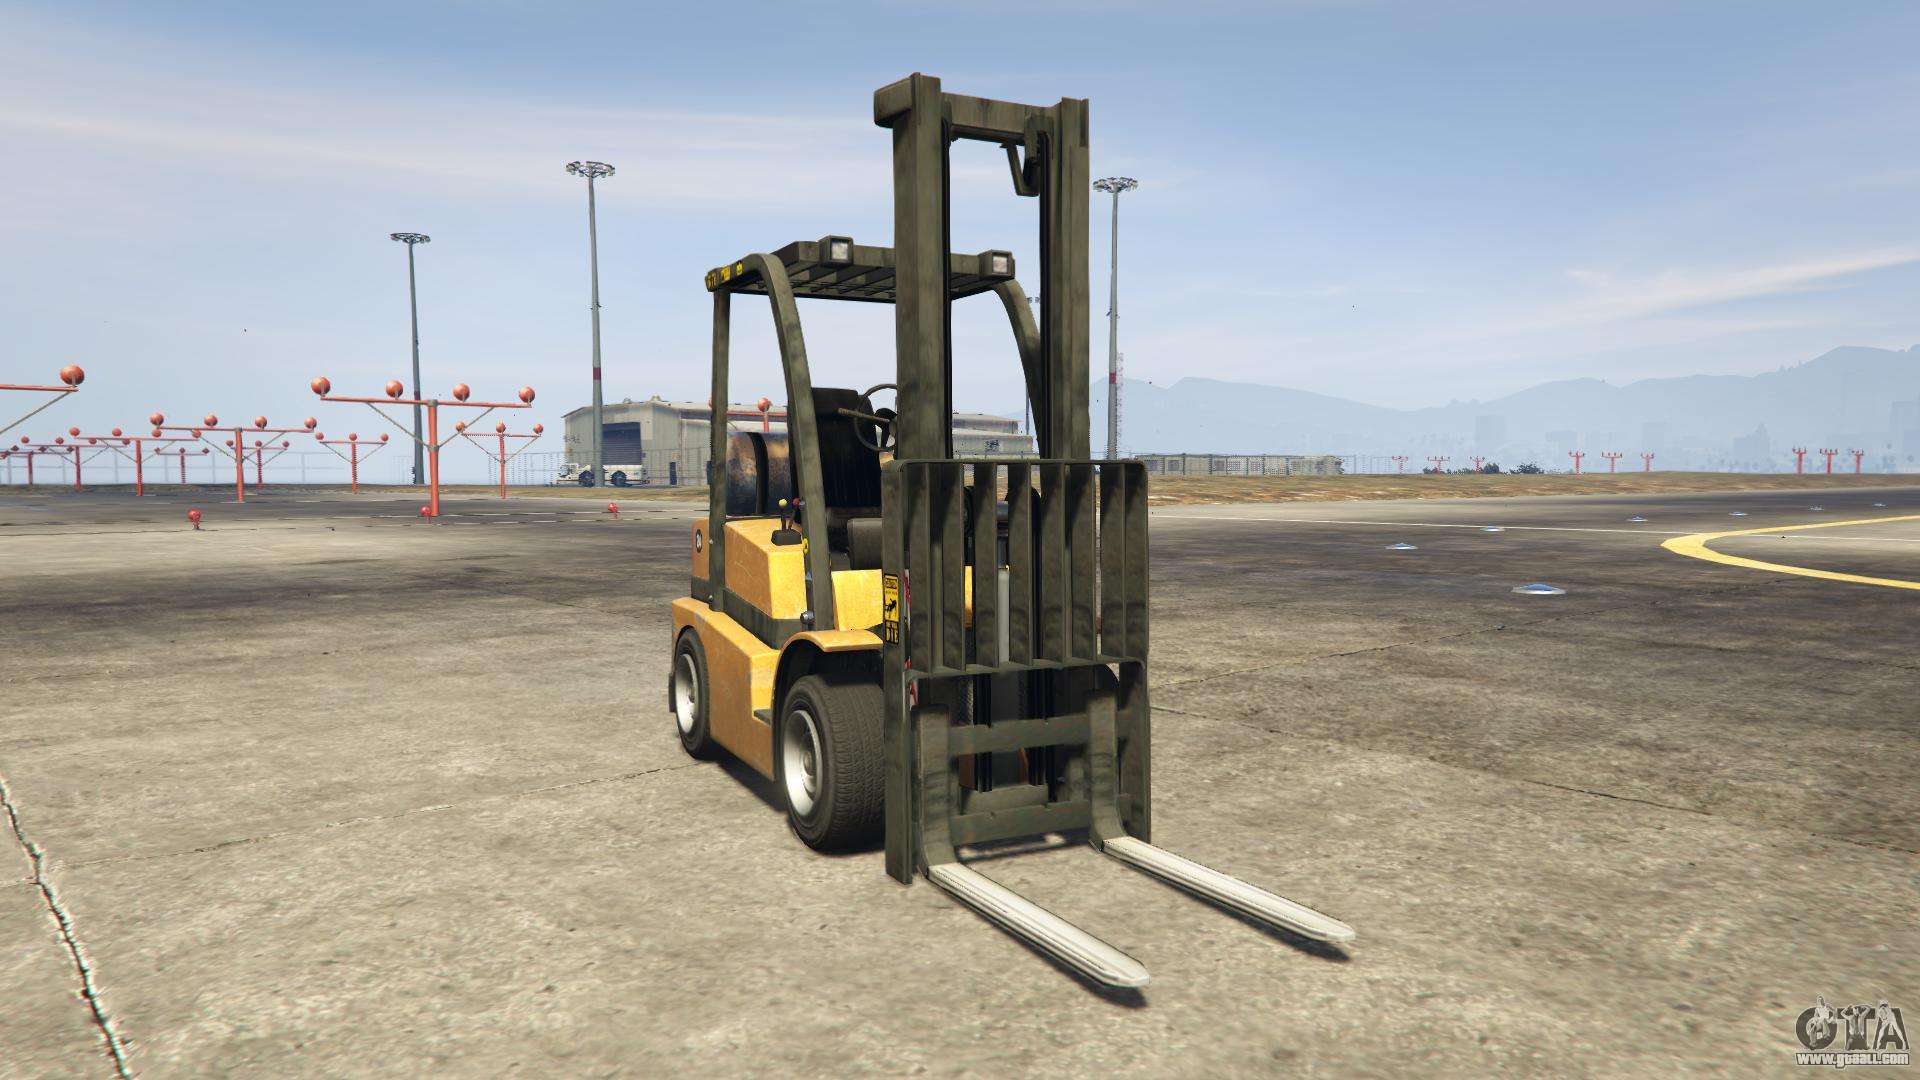 Gta 5 Hvy Forklift Screenshots Description And Specifications Of The Forklift